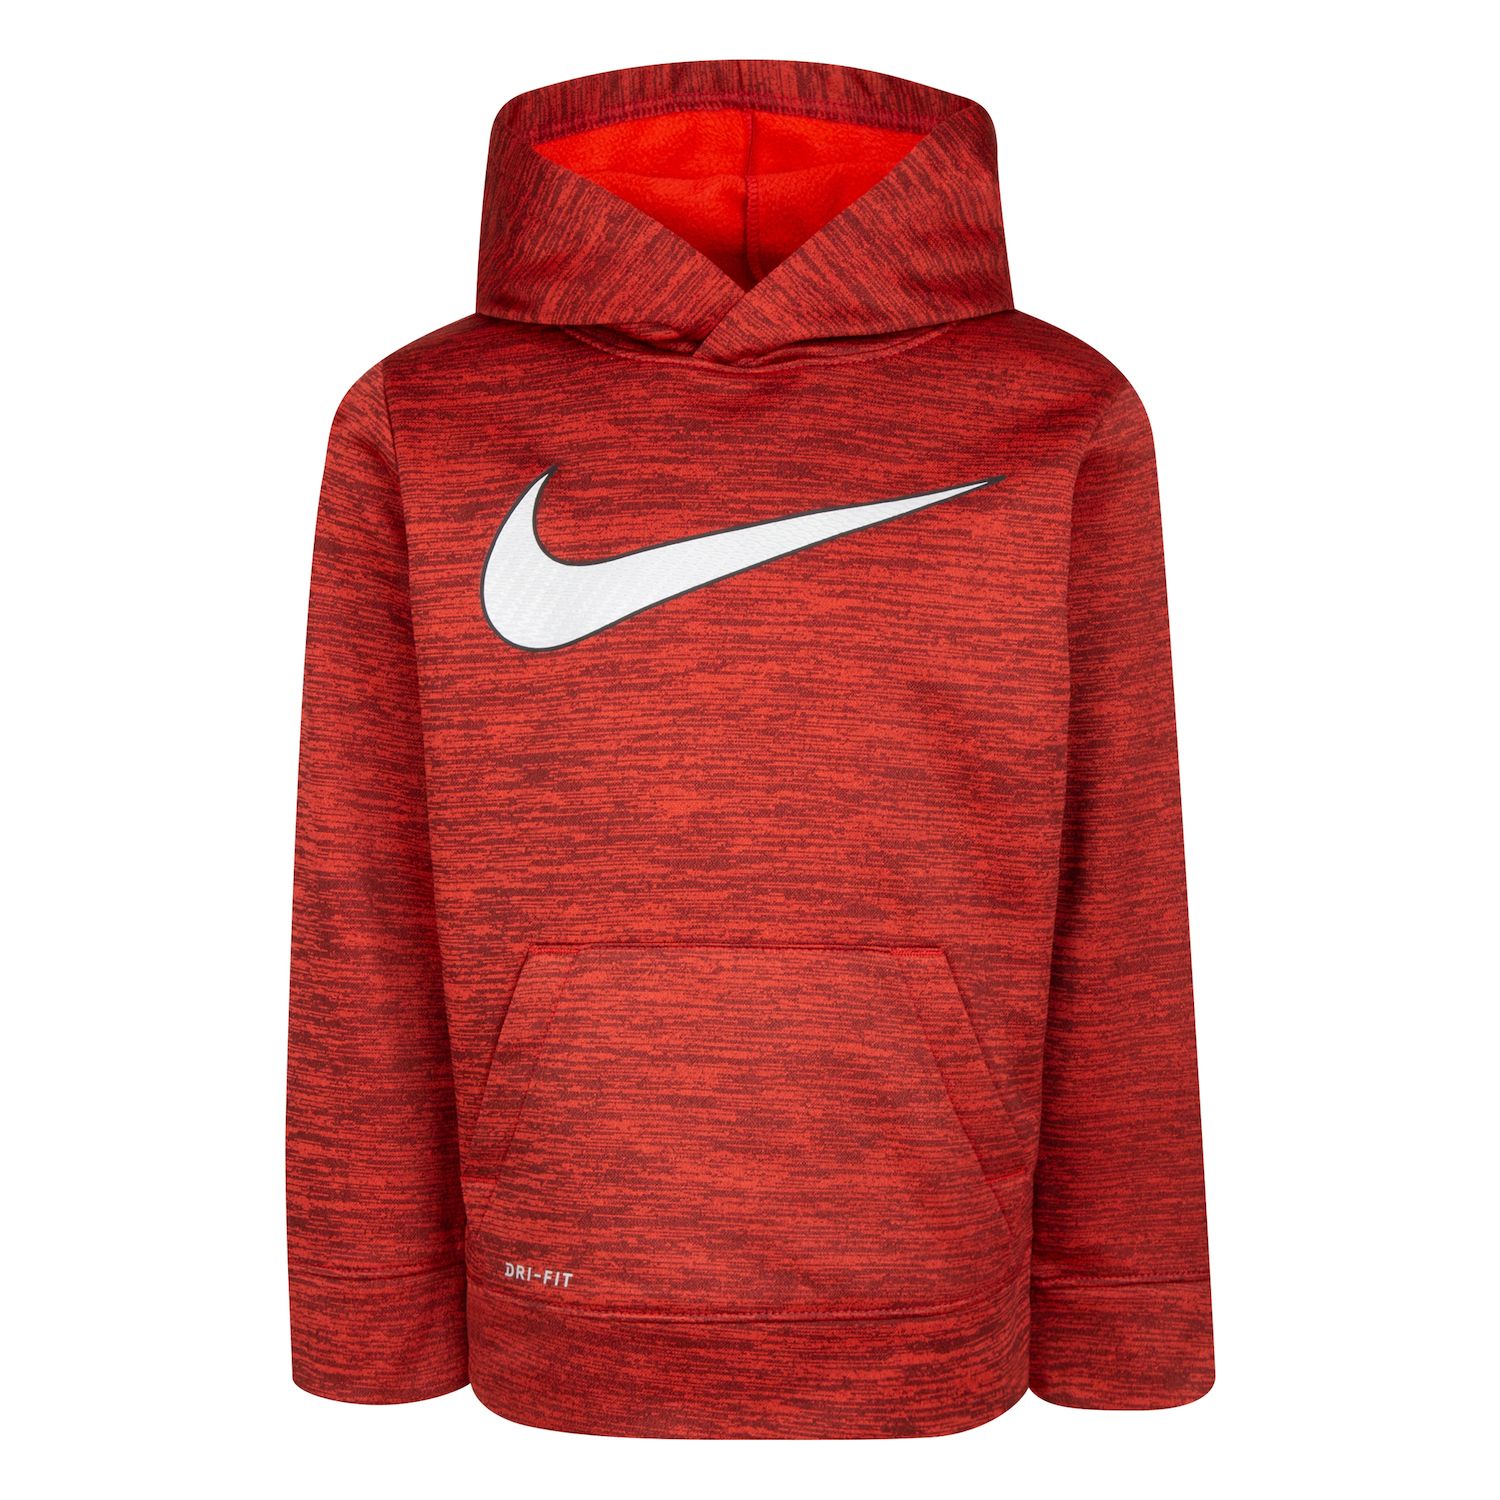 all red nike outfit